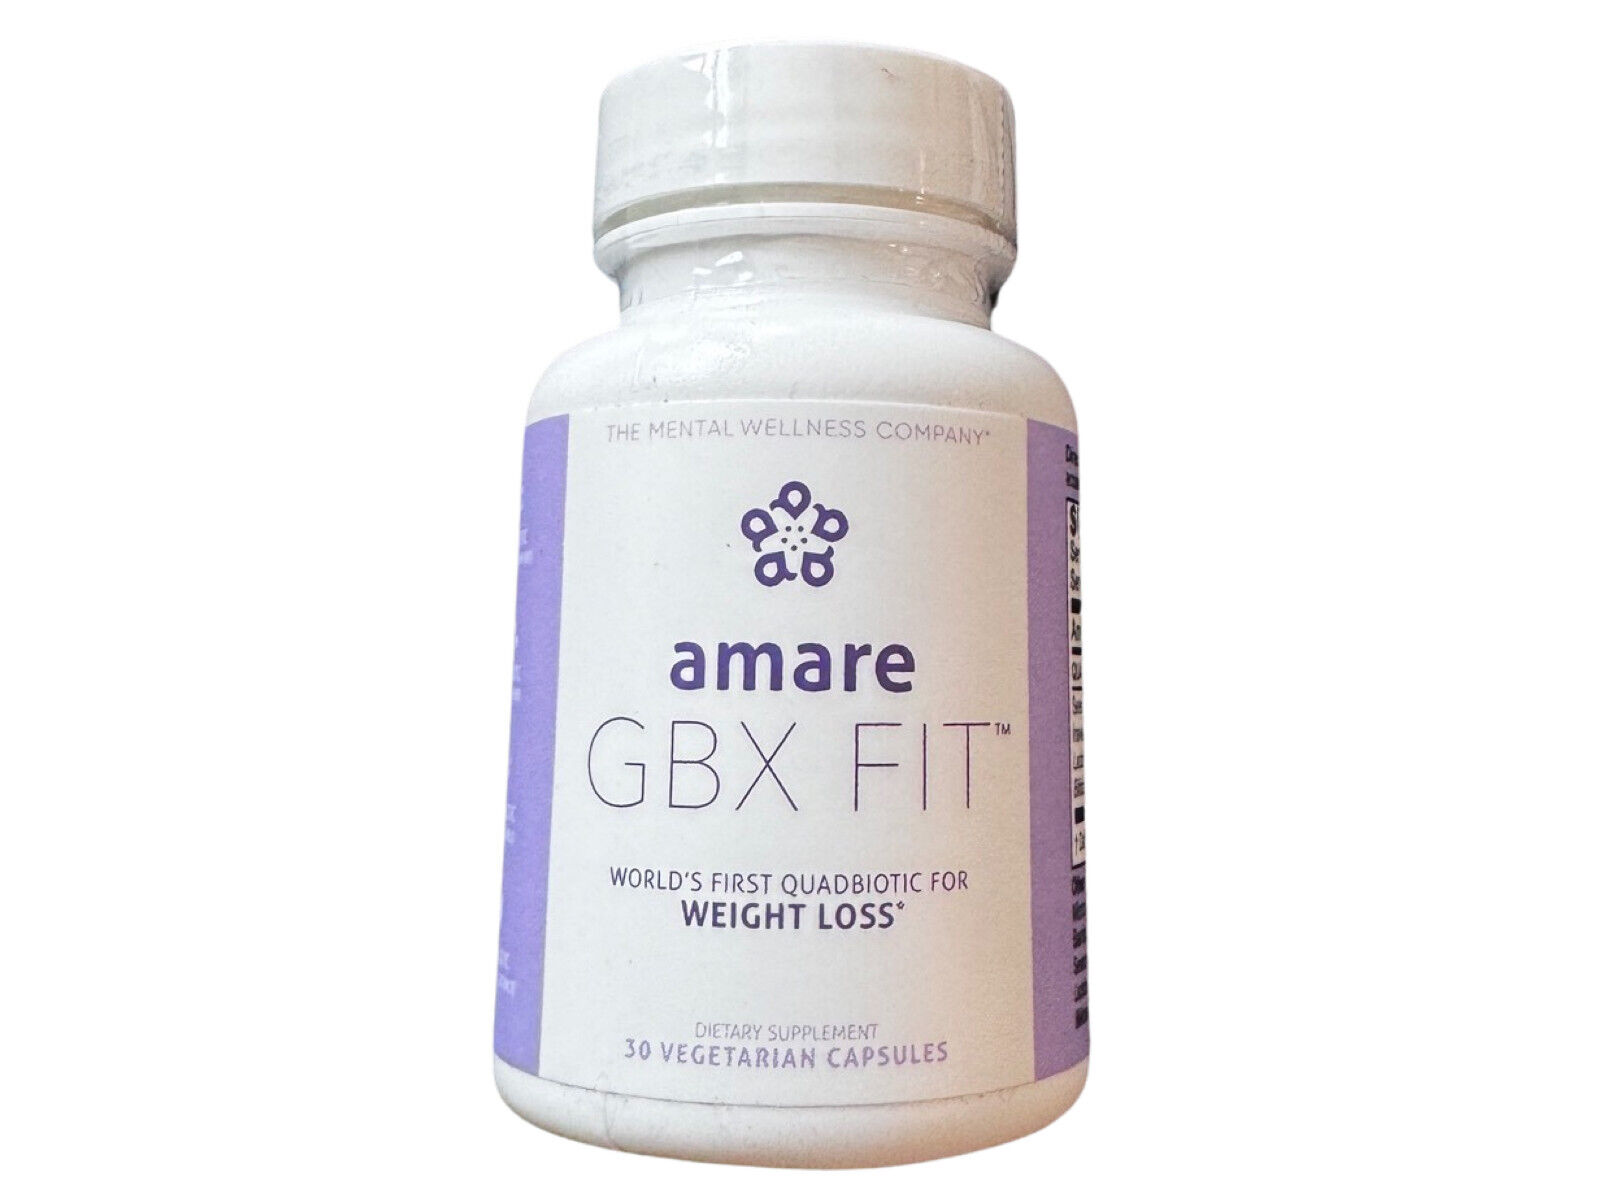 AMARE GLOBAL GBX FIT 30 CAPSULES -  1ST QUADBIOTIC FOR WEIGHT LOSS - NEW SEALED